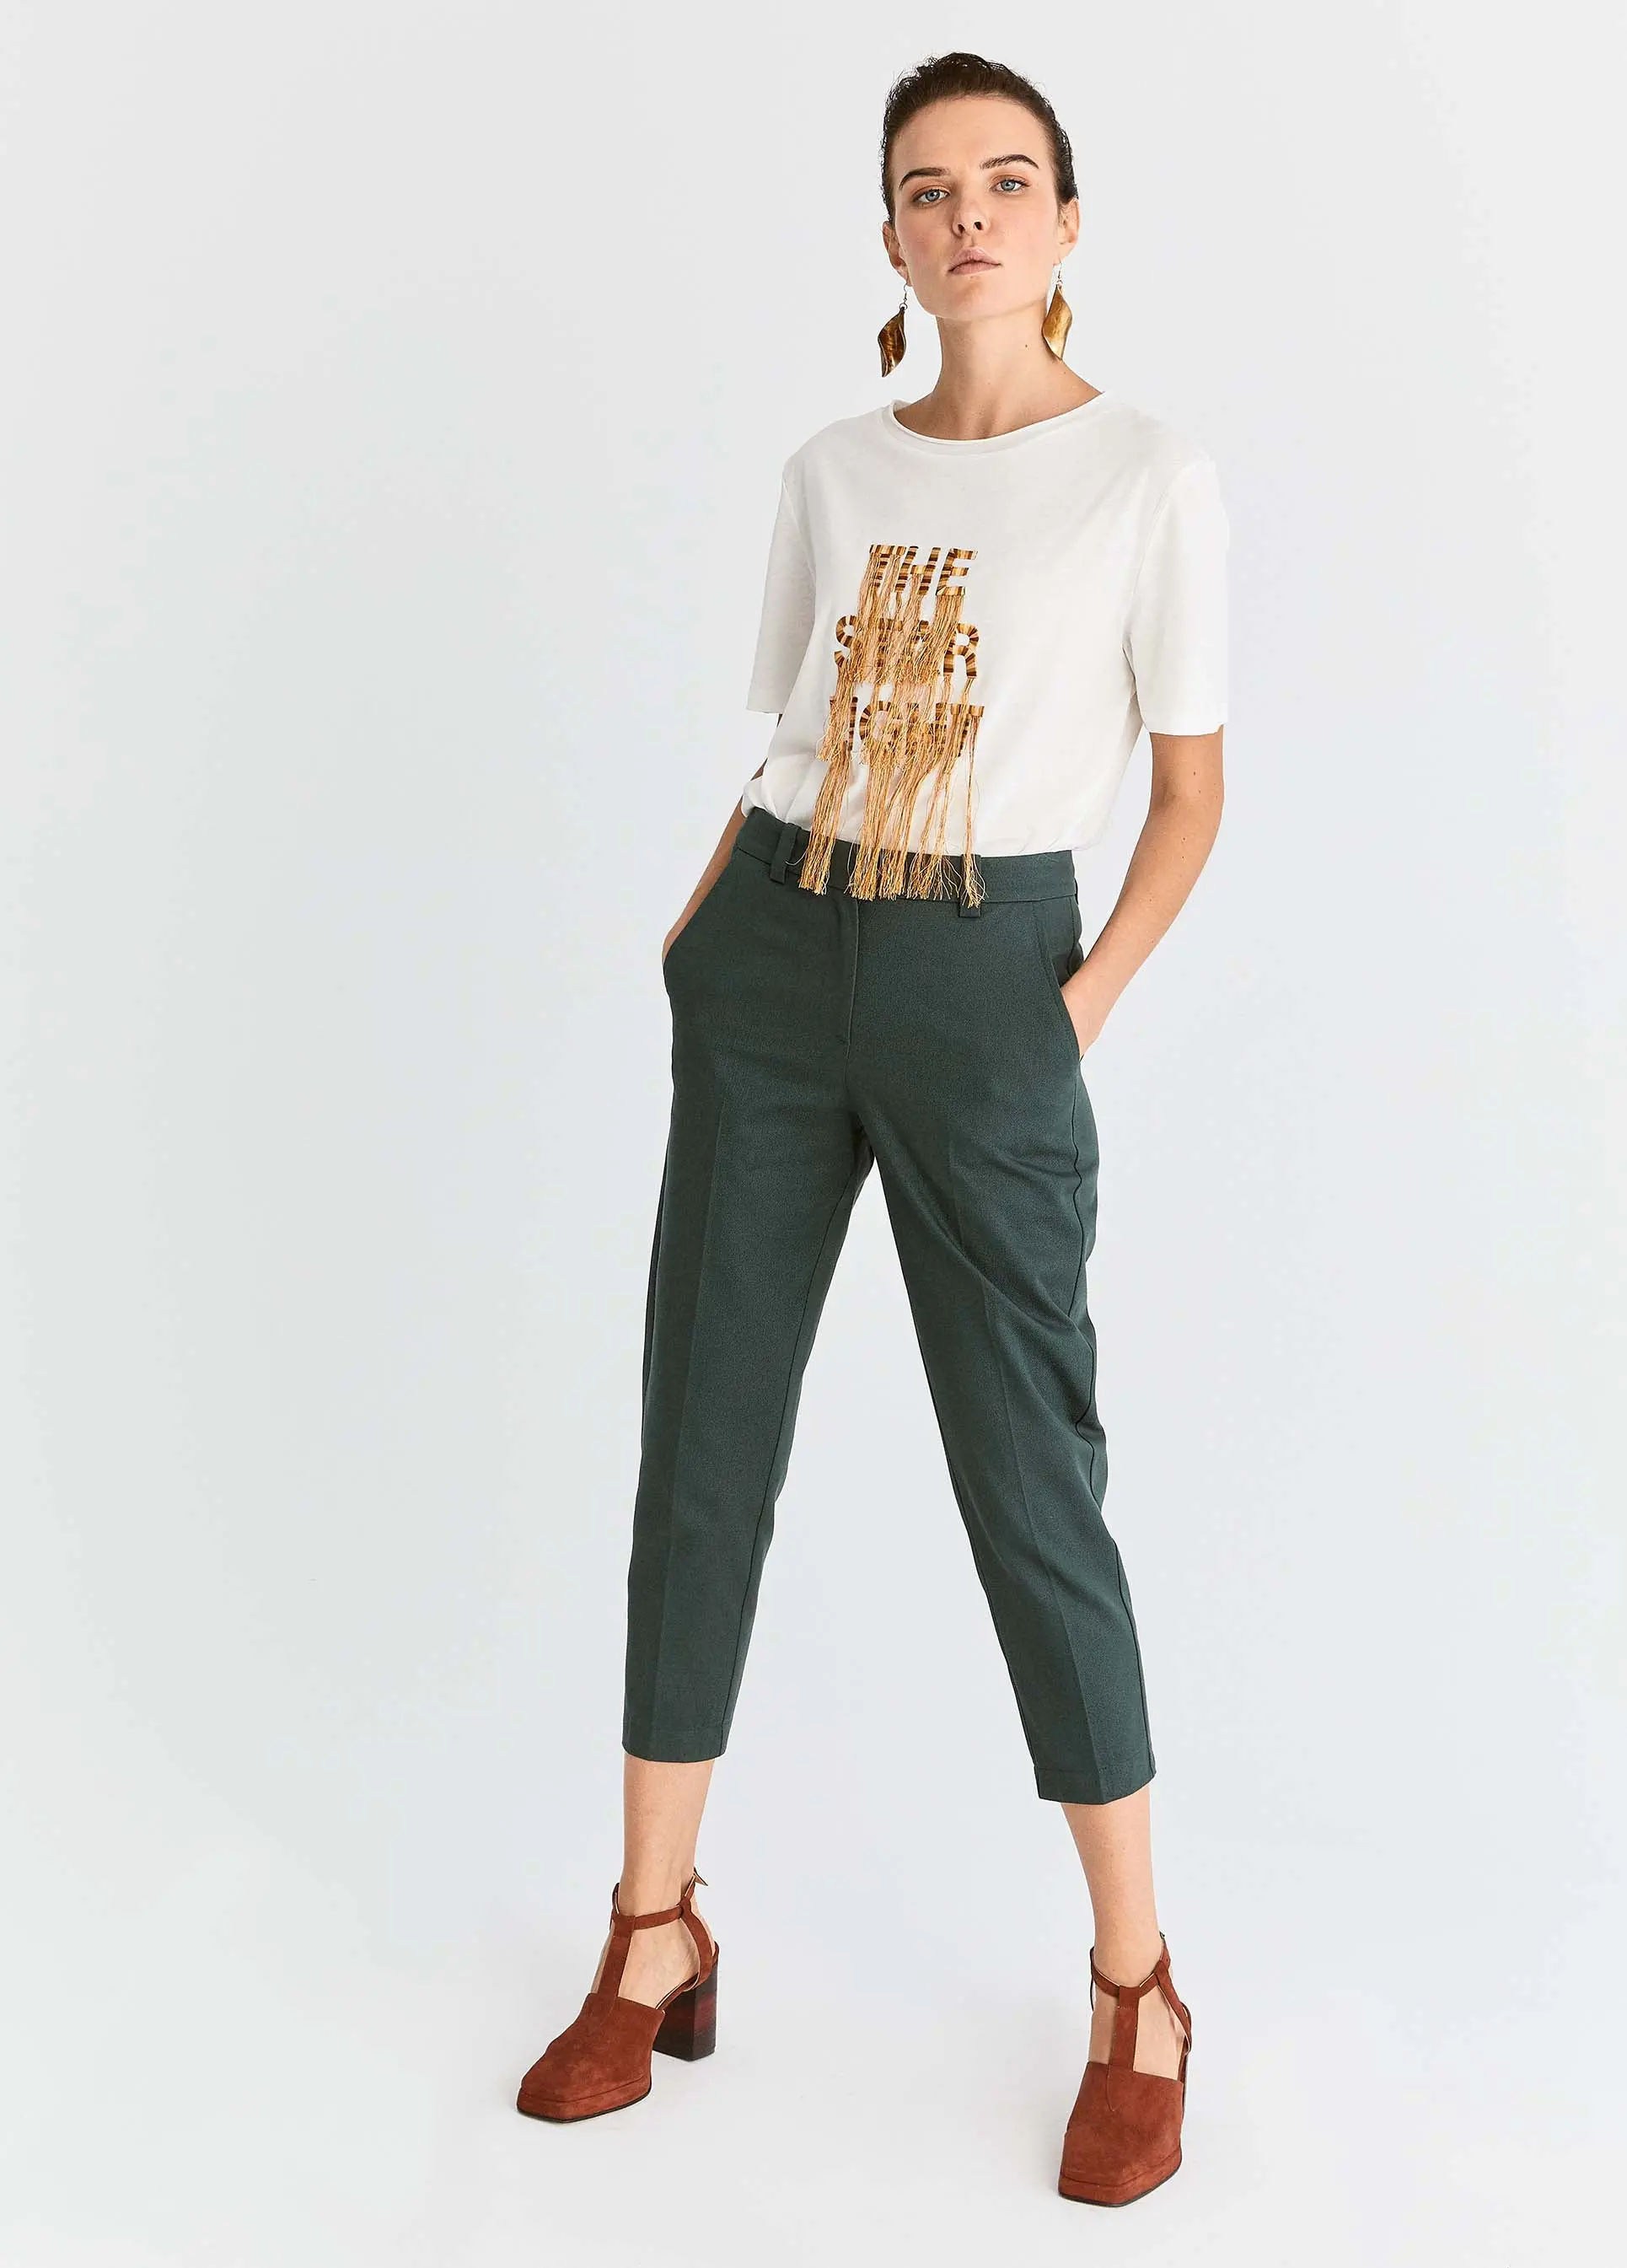 Roman Green Tapered Cropped Pant - 4 / GREEN. 1